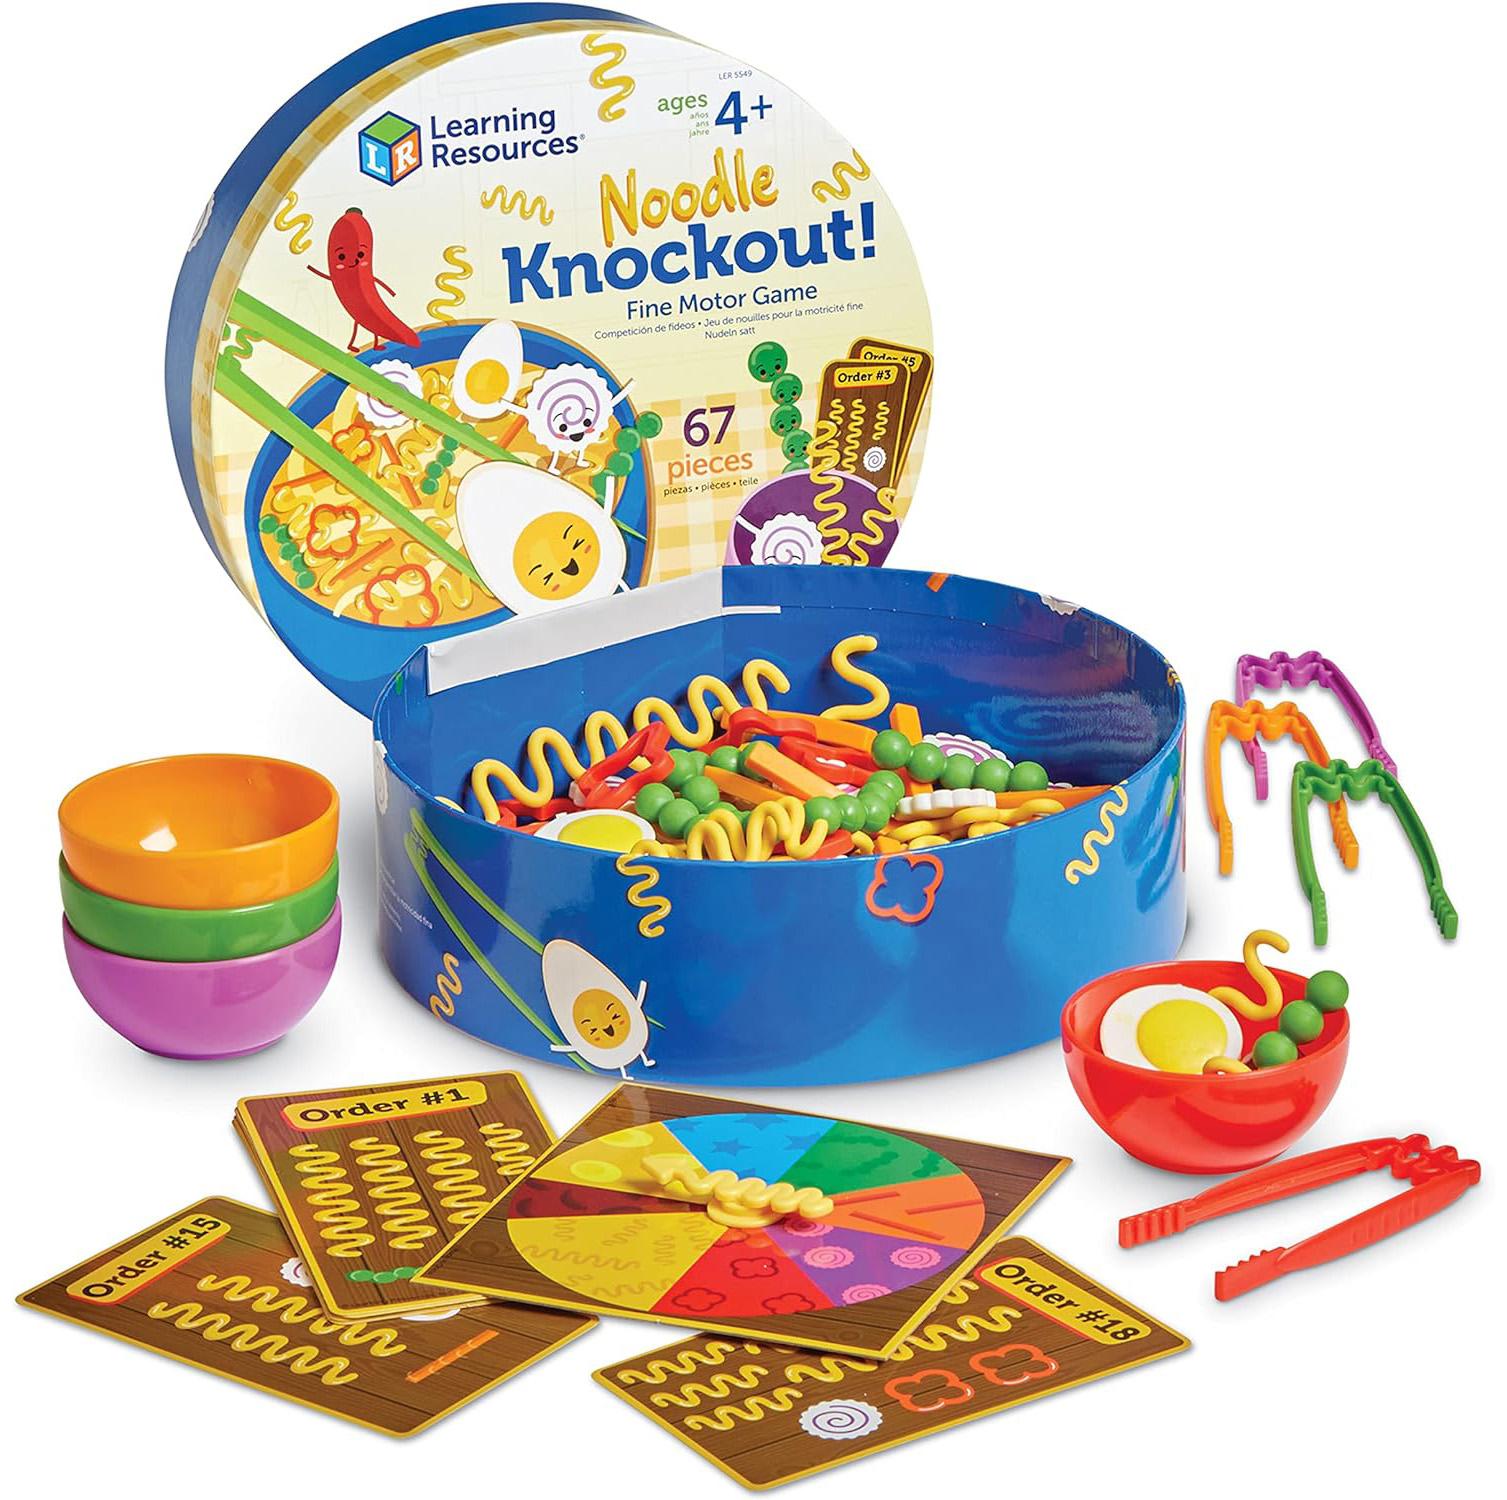 Learning Resources Noodle Knockout! Fine Motor Game for $11.99